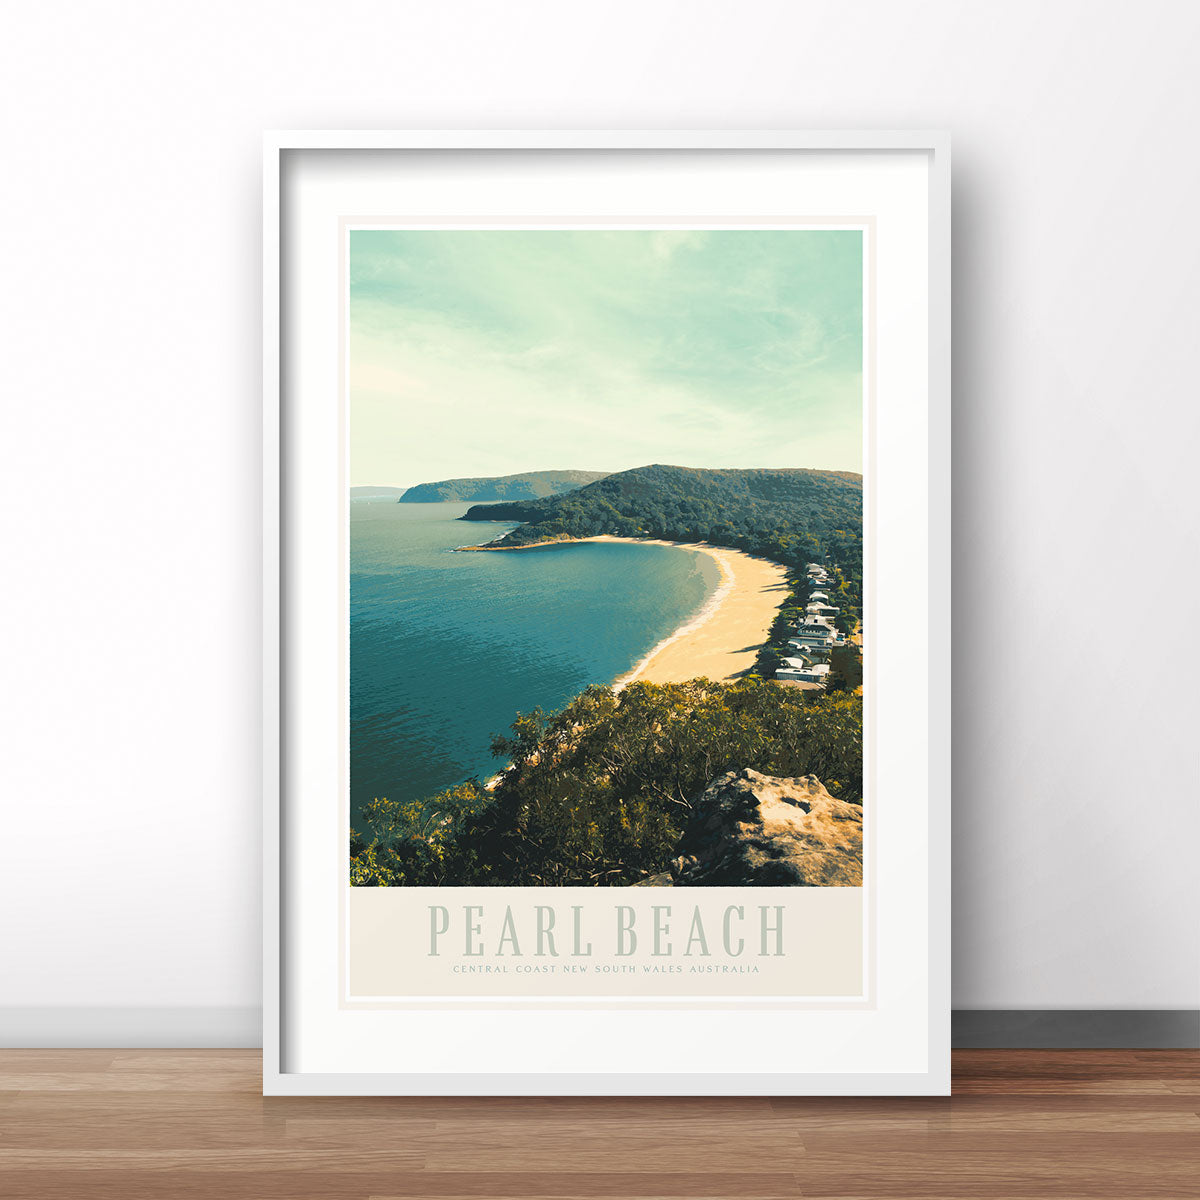 Pearl beach vintage travel poster print central coast by places we luv